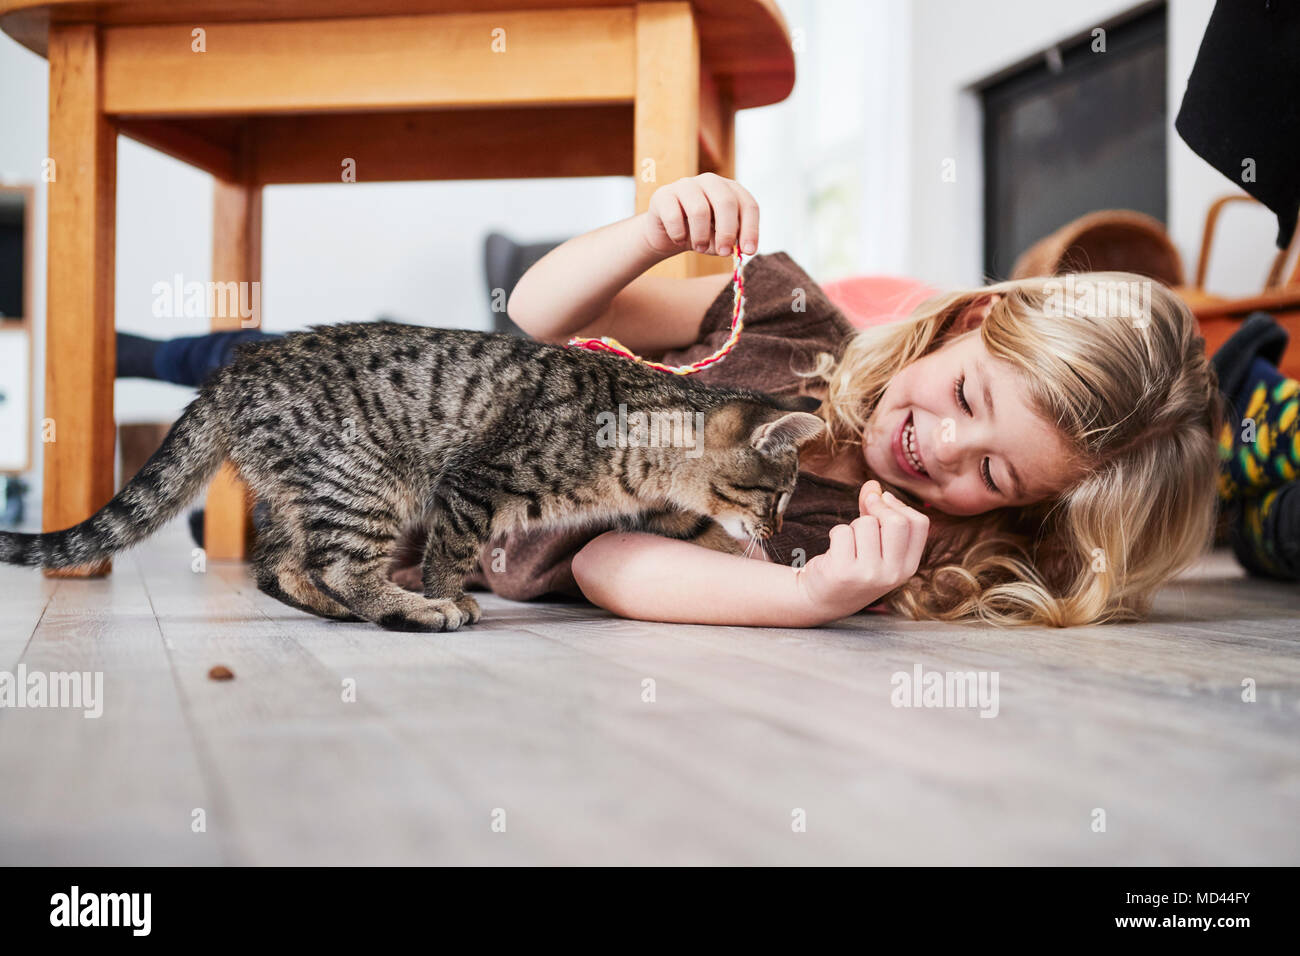 Young girl lying on floor, playing with pet cat Stock Photo